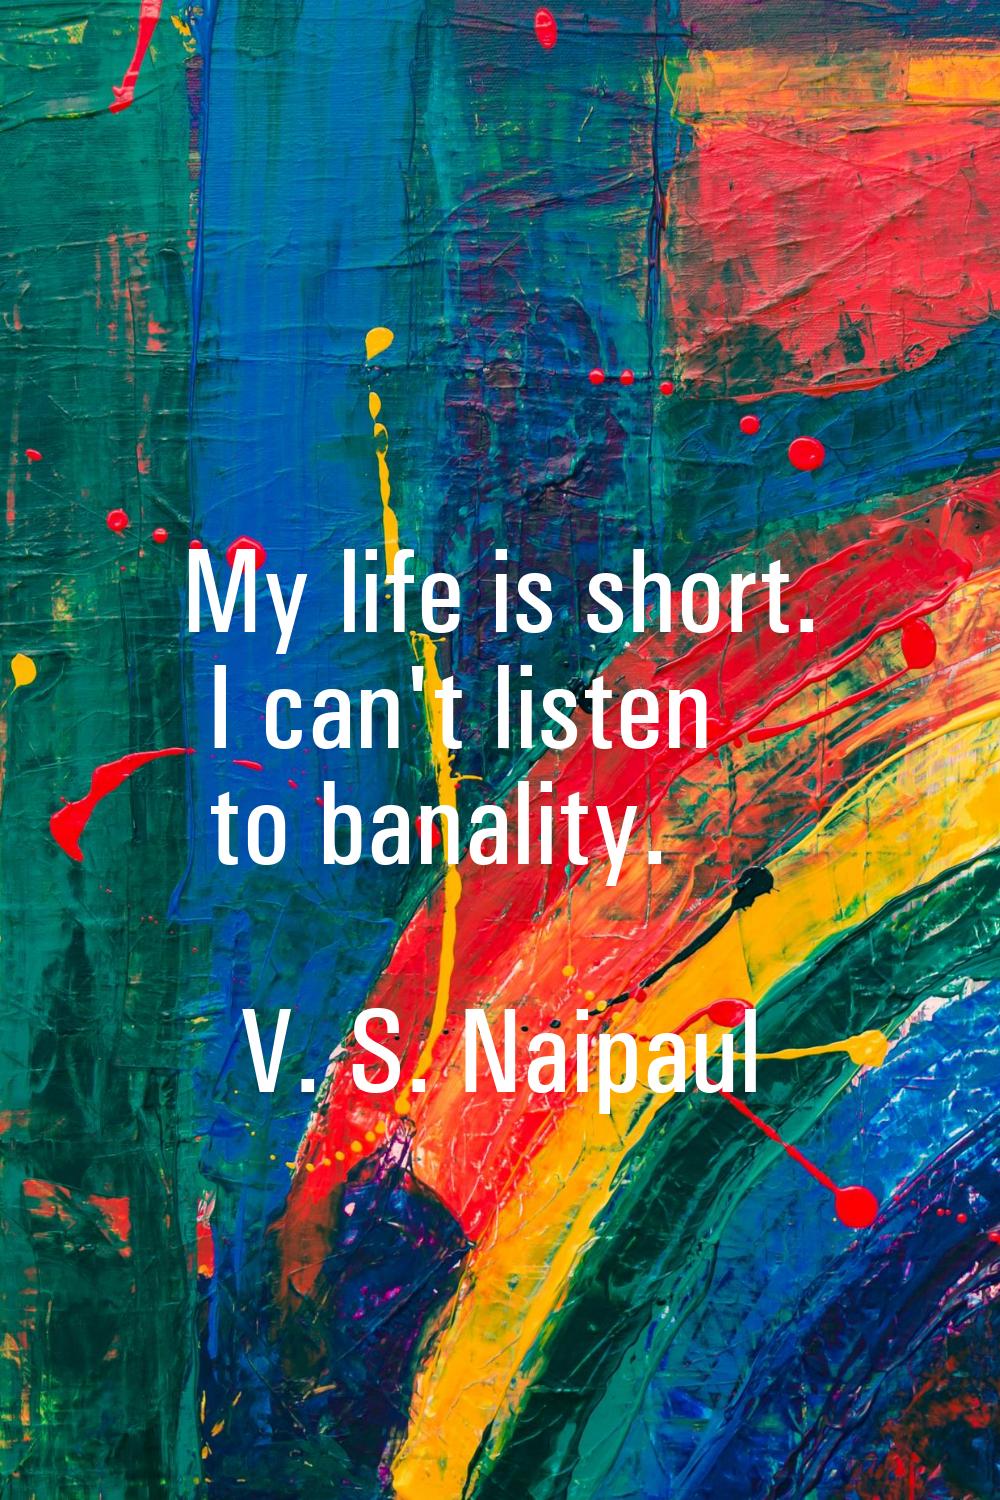 My life is short. I can't listen to banality.